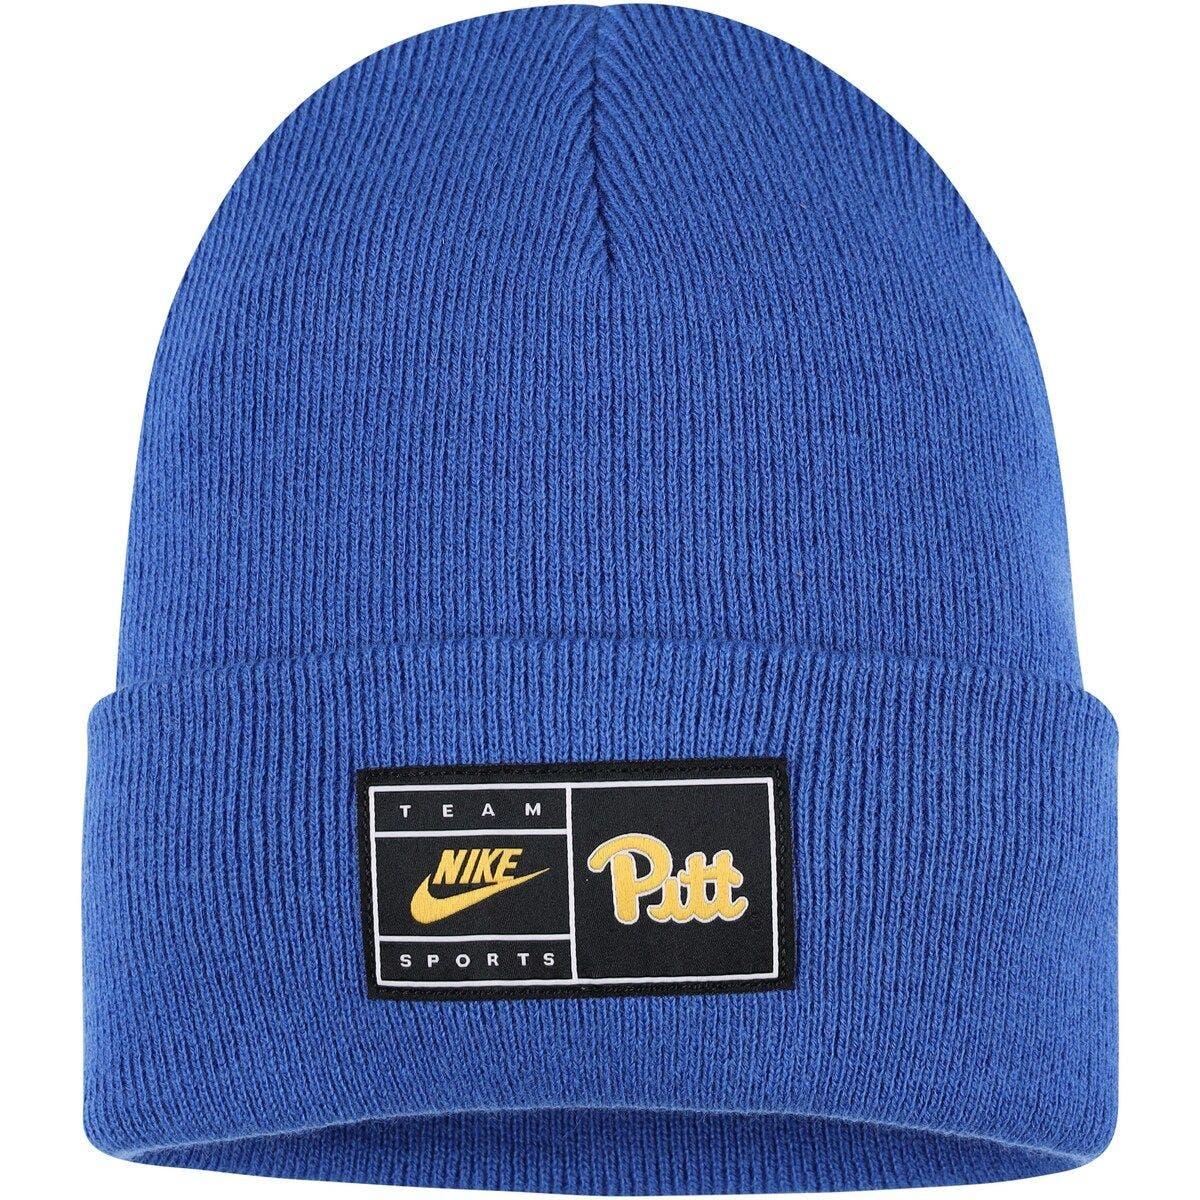 Men's Nike Black Purdue Boilermakers Sideline Team Cuffed Knit Hat with Pom